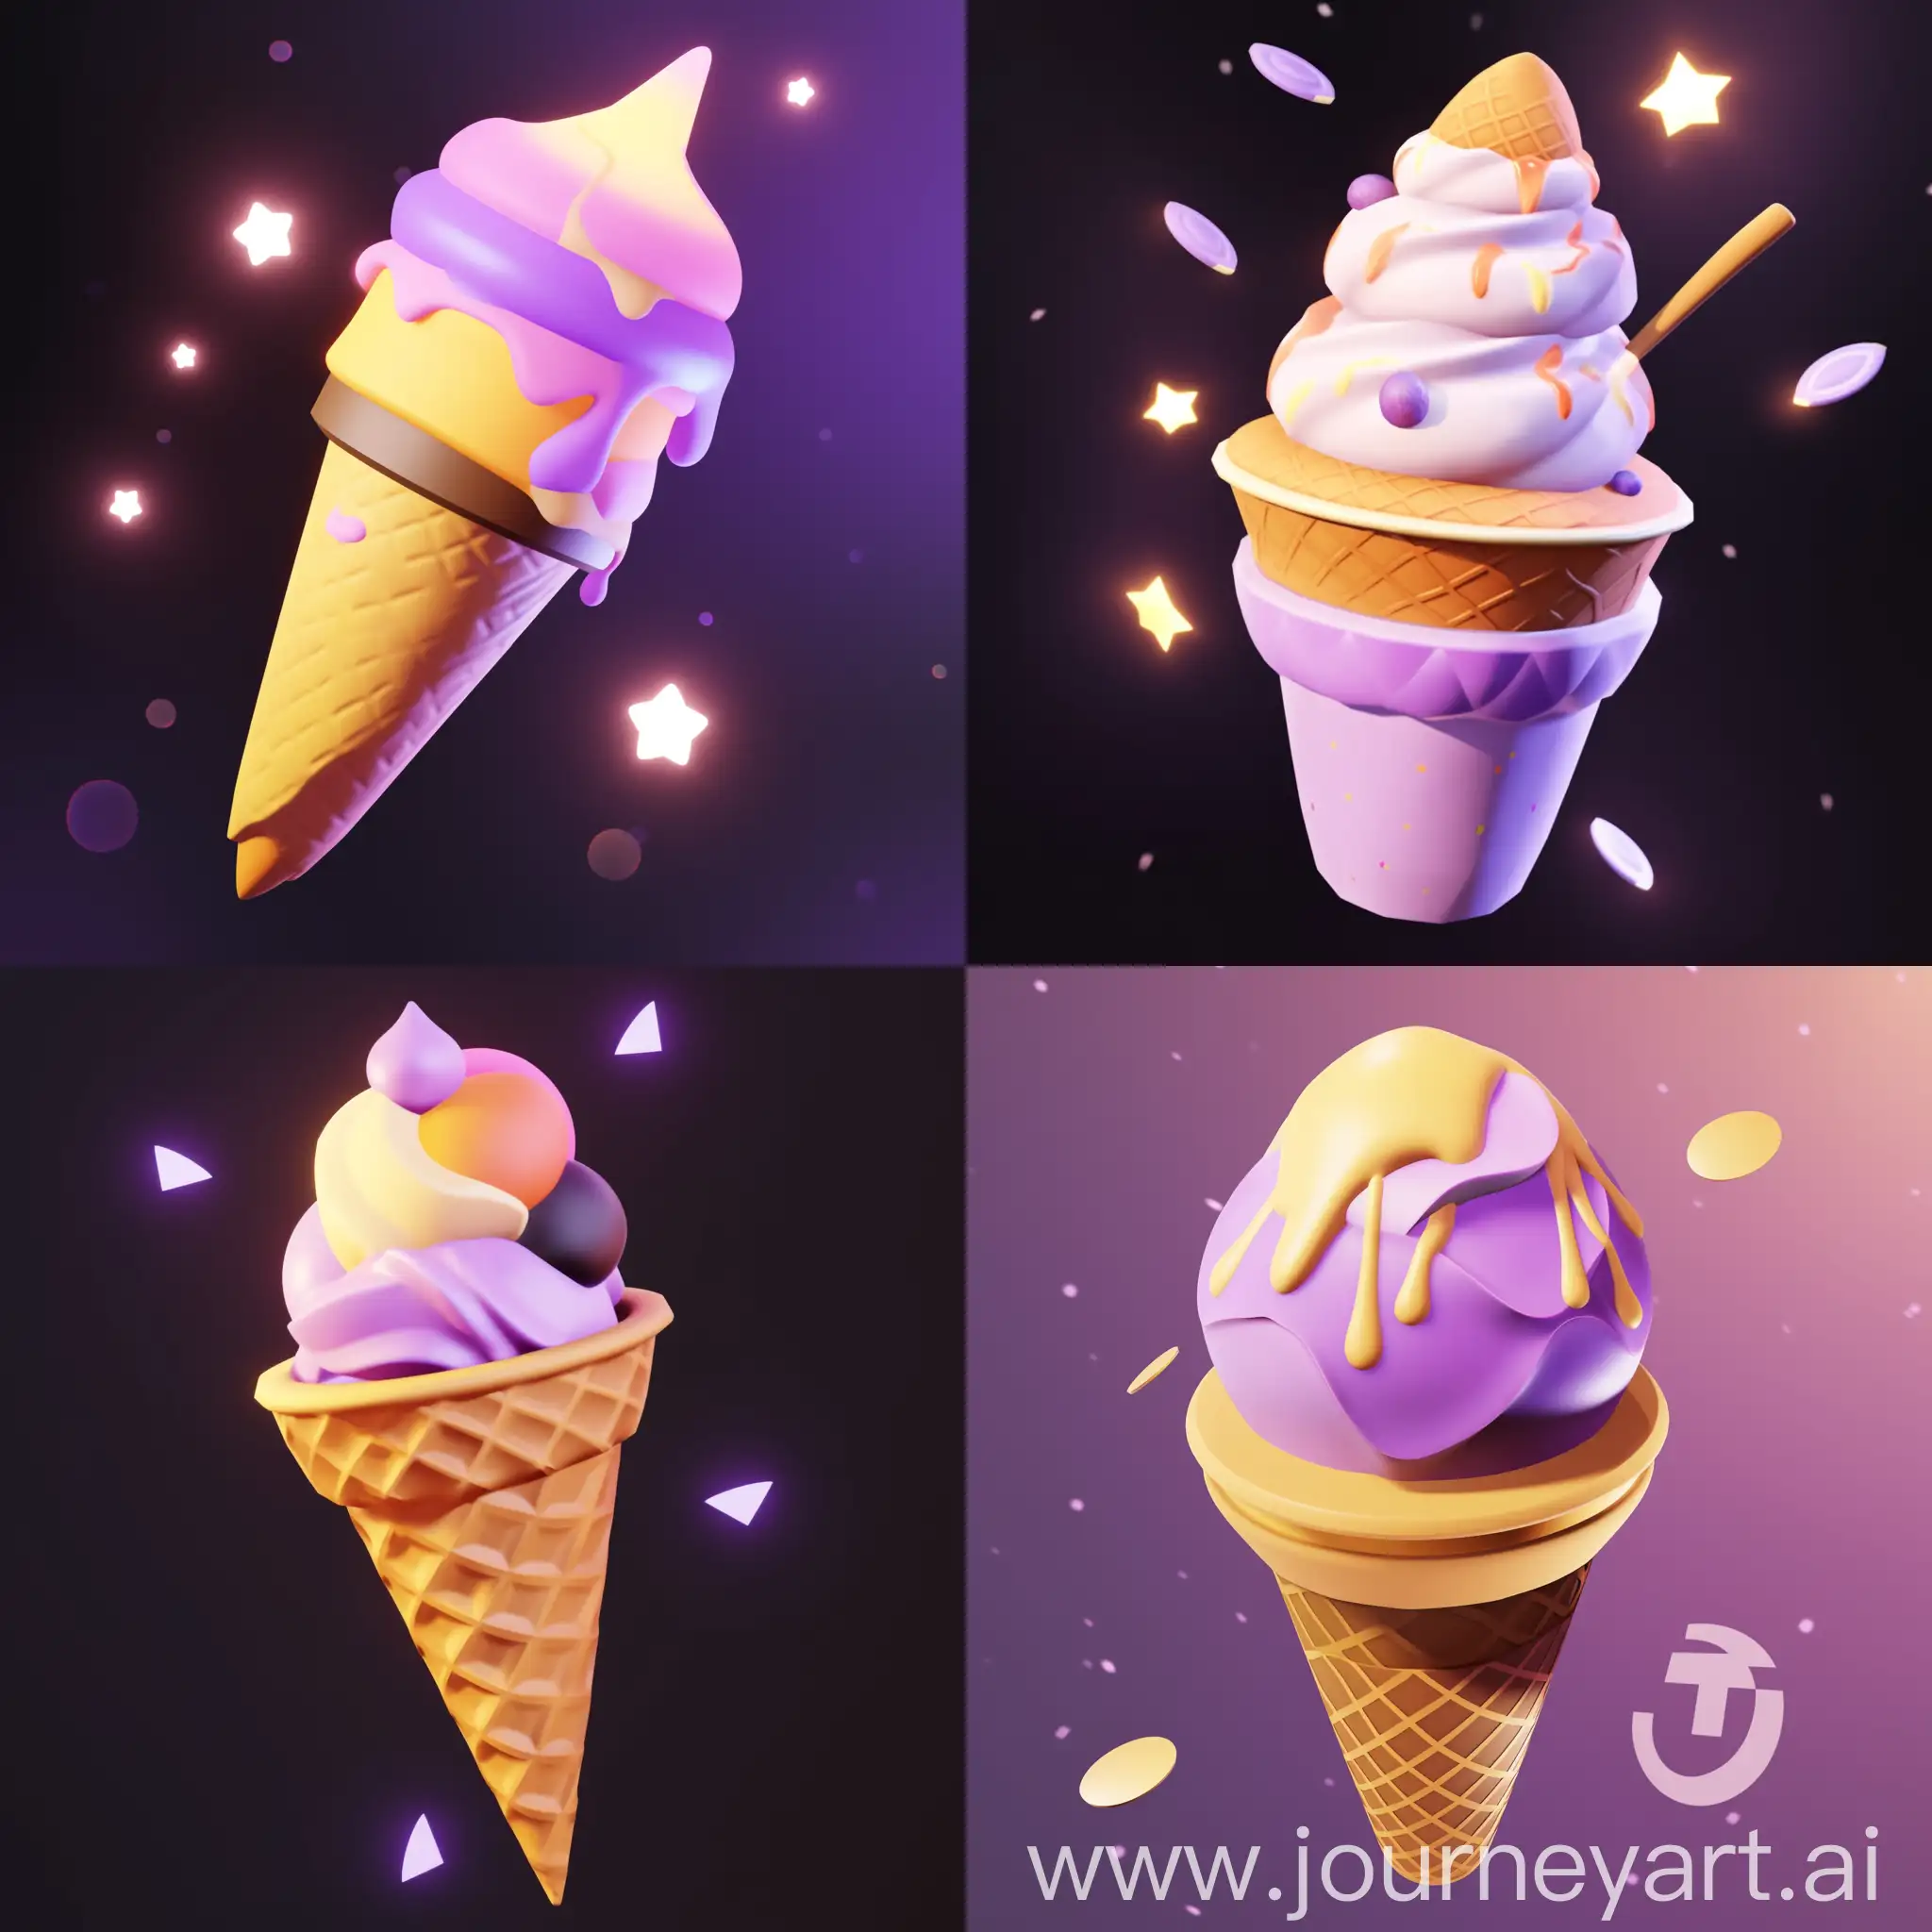 Colorful-Cartoon-Ice-Cream-in-Isometric-View-with-Spot-Light-on-Dark-Background